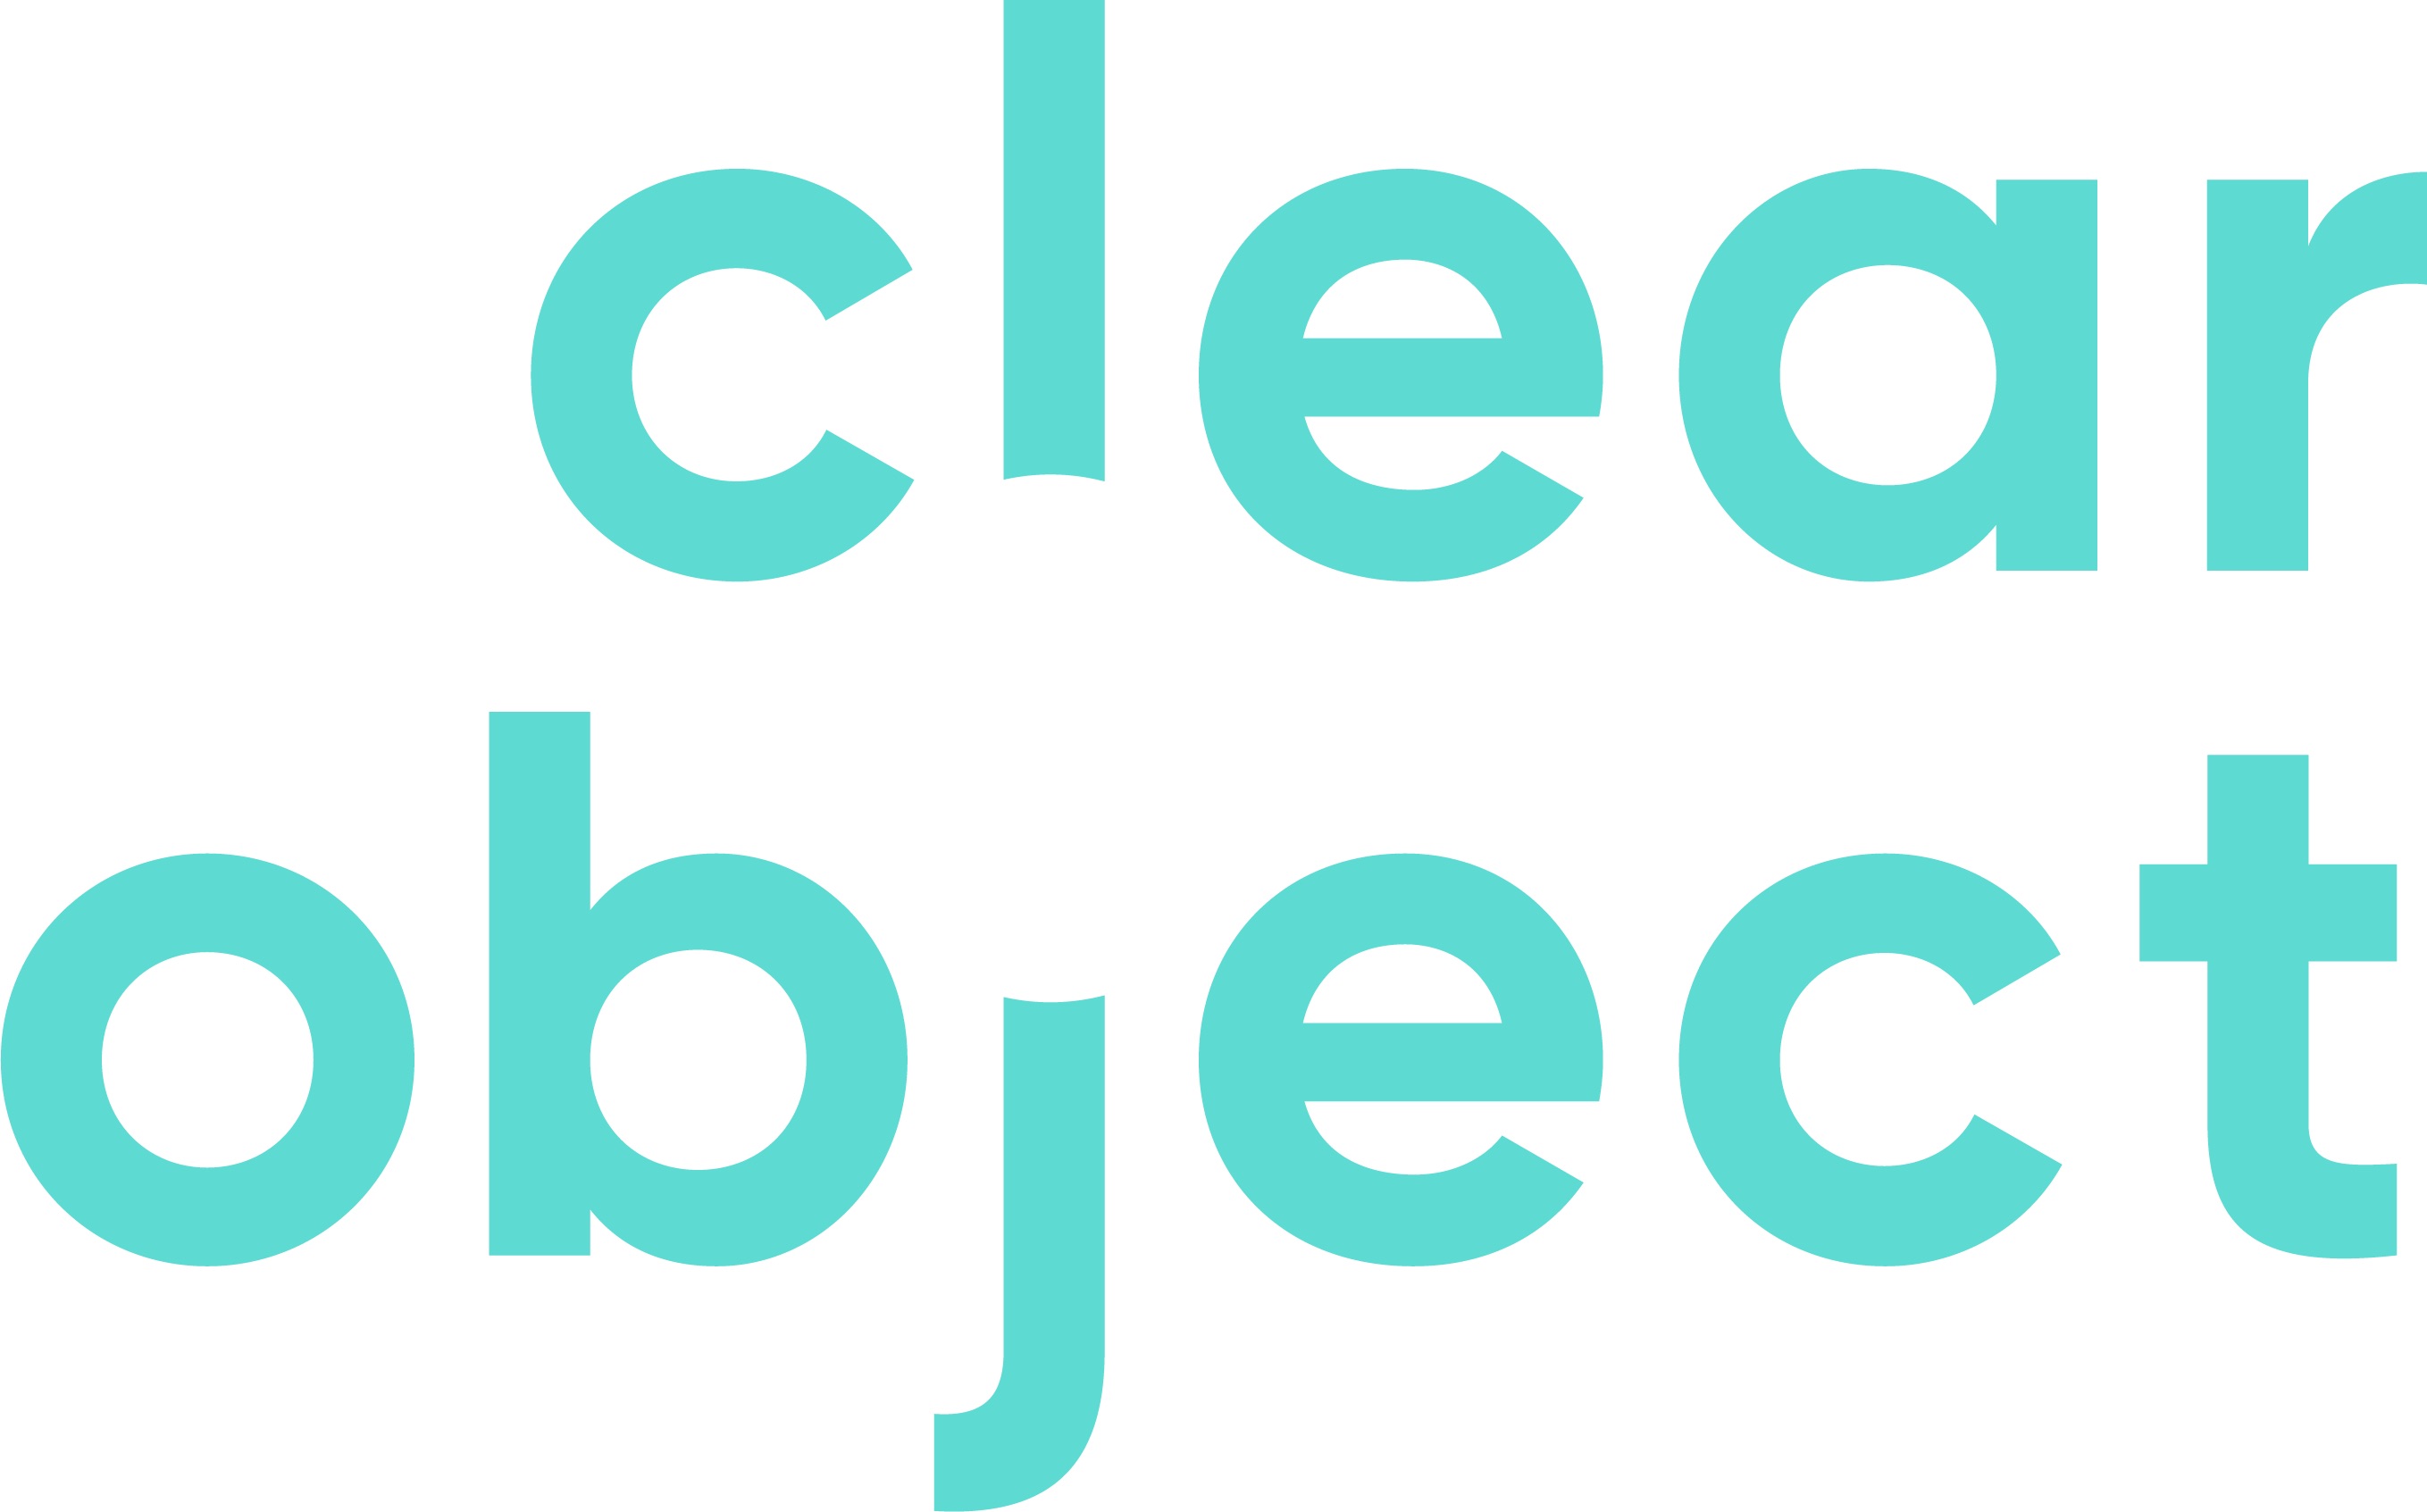 ClearObject